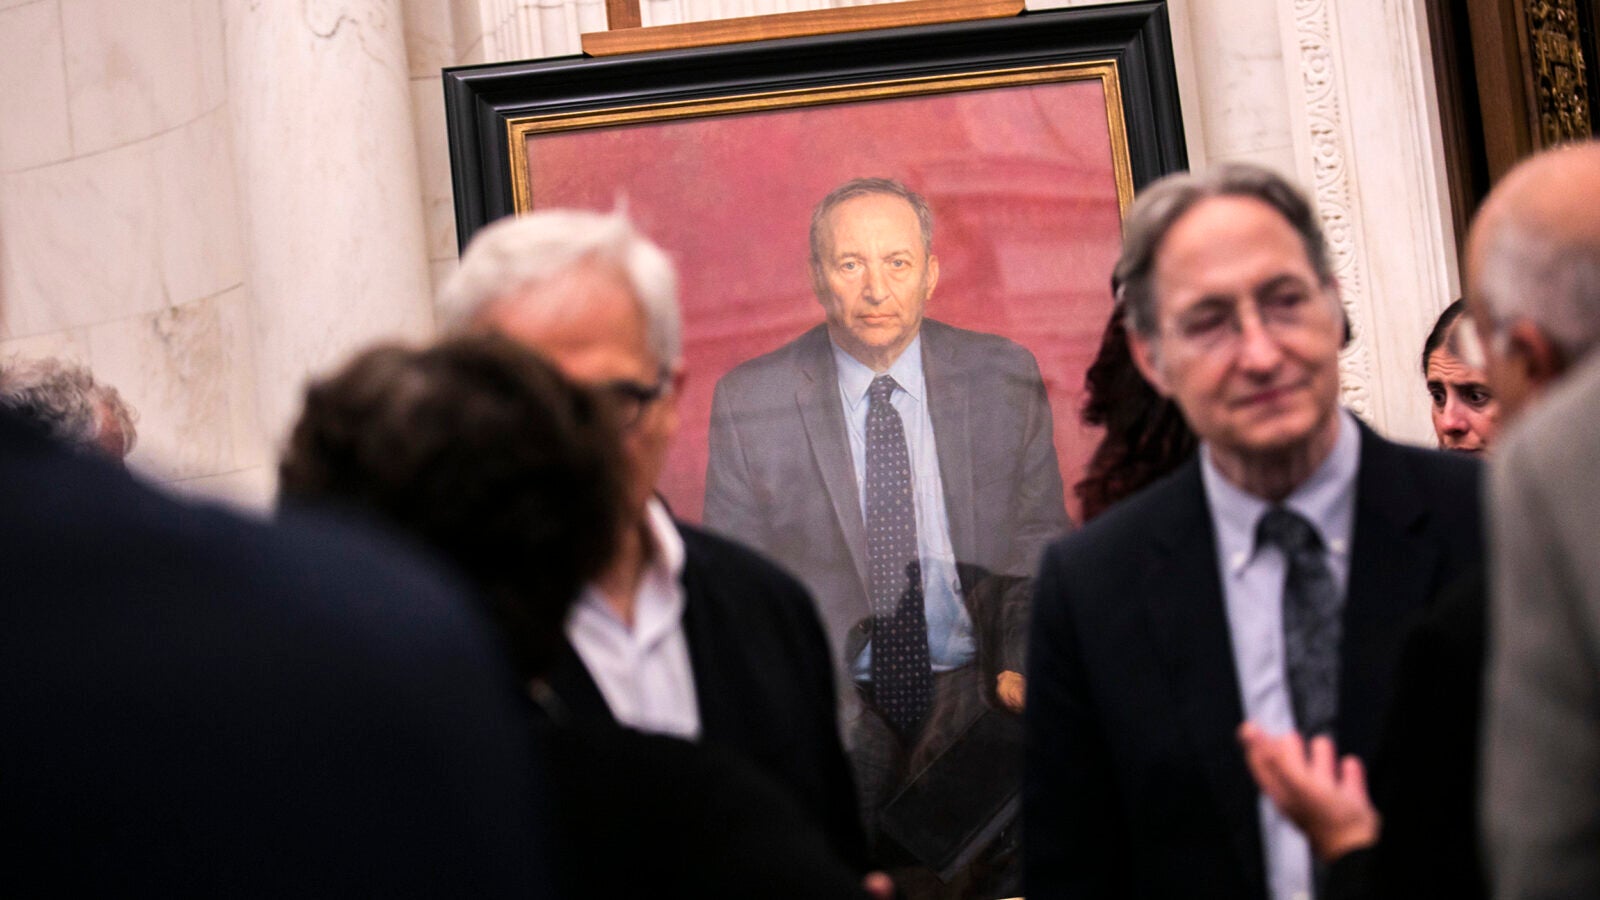 At the unveiling of Lawrence Summers portrait.